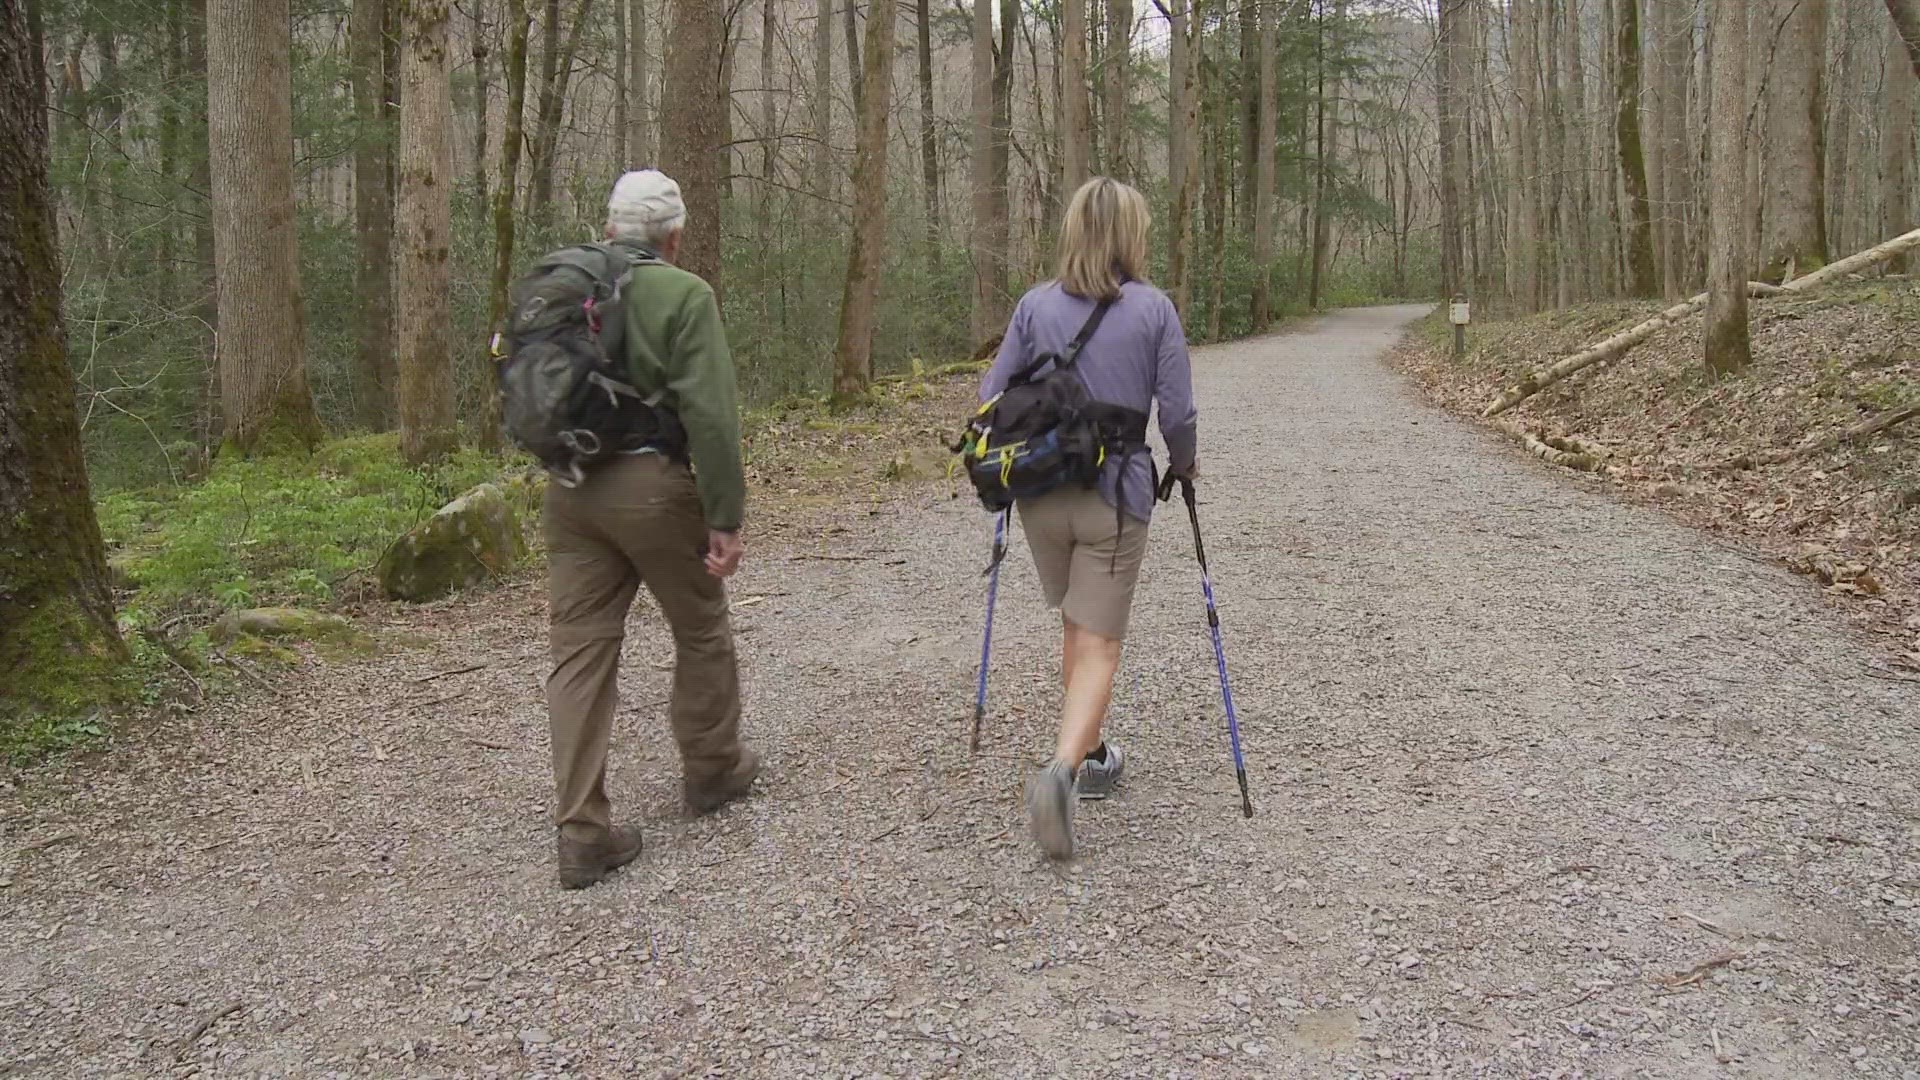 The Smoky Mountains Hiking Club is ten years older than the national park itself -- turning 100 this year.